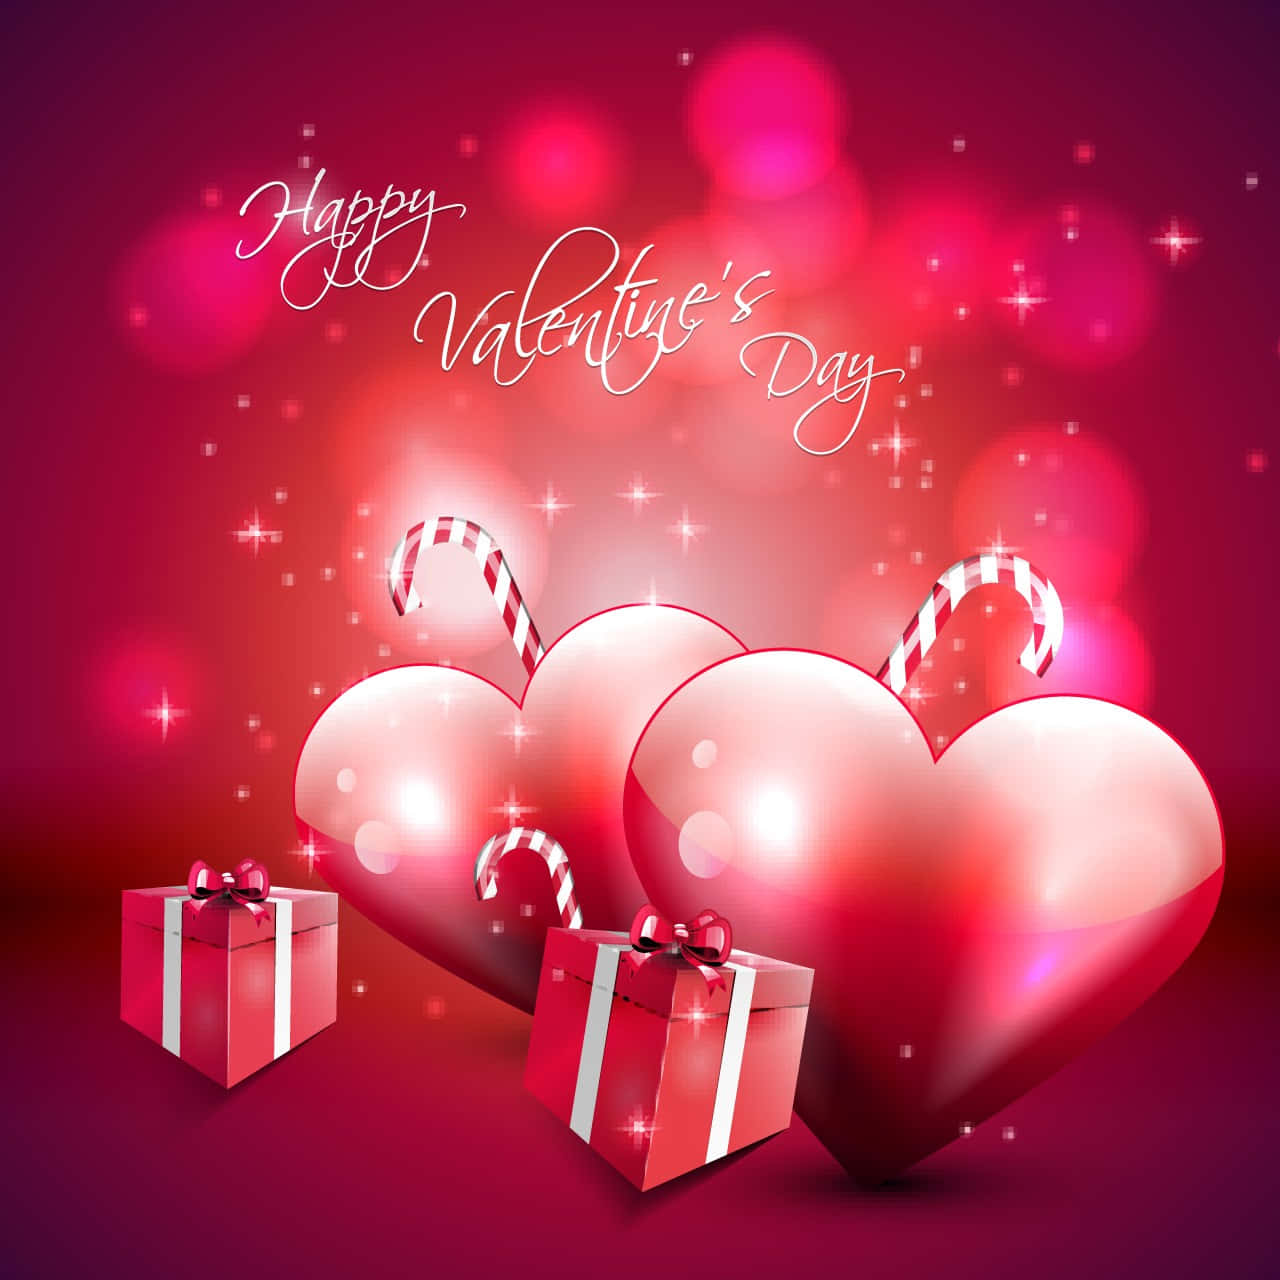 Red Cute Valentines Day Illustration Background